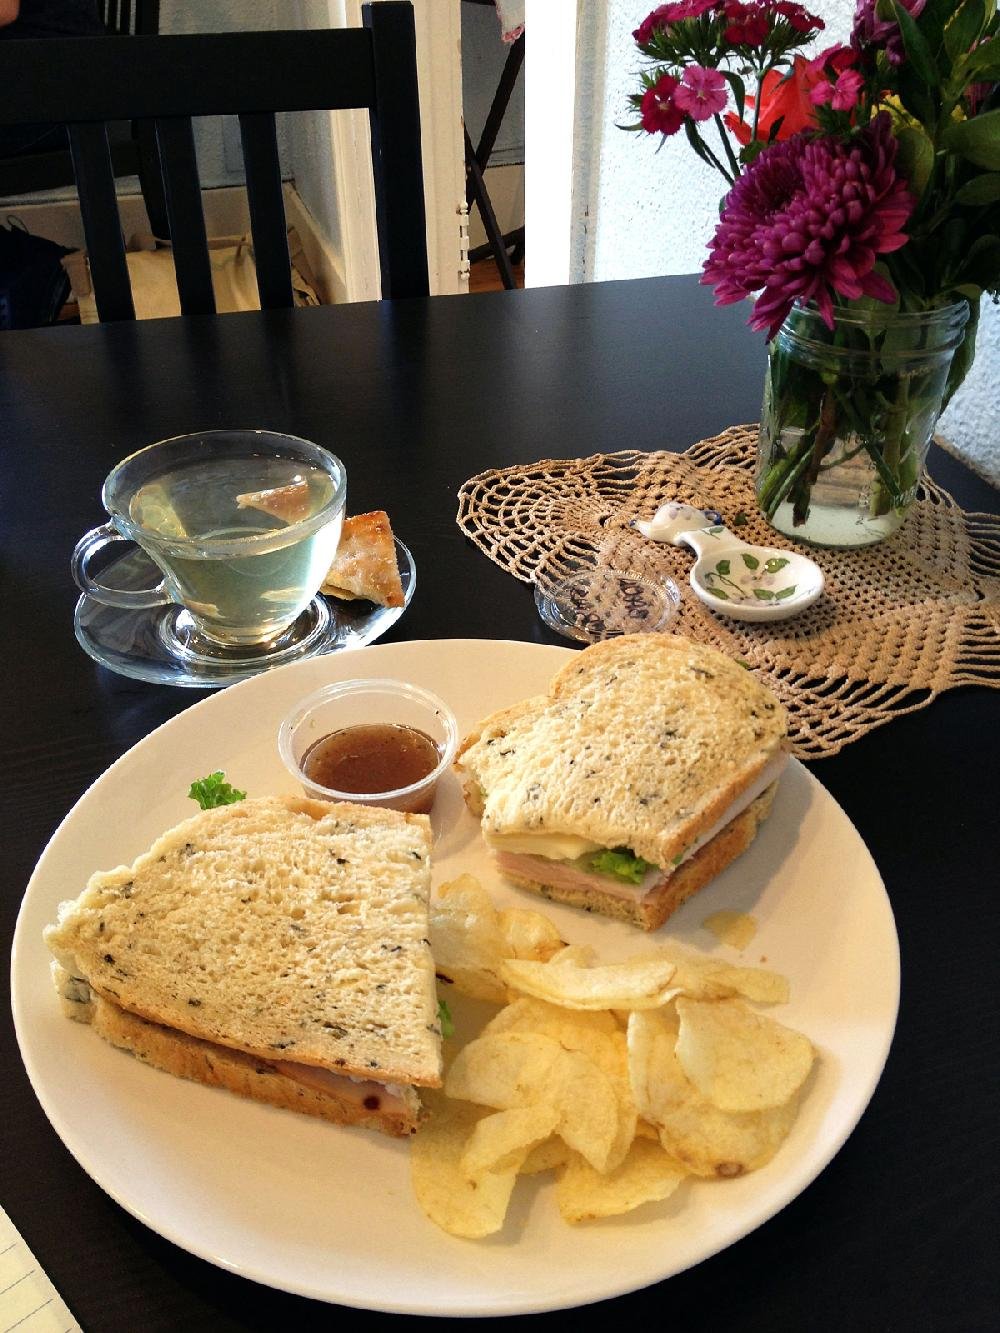 REVIEW: Abbi's in Hillcrest perfect spot for tea